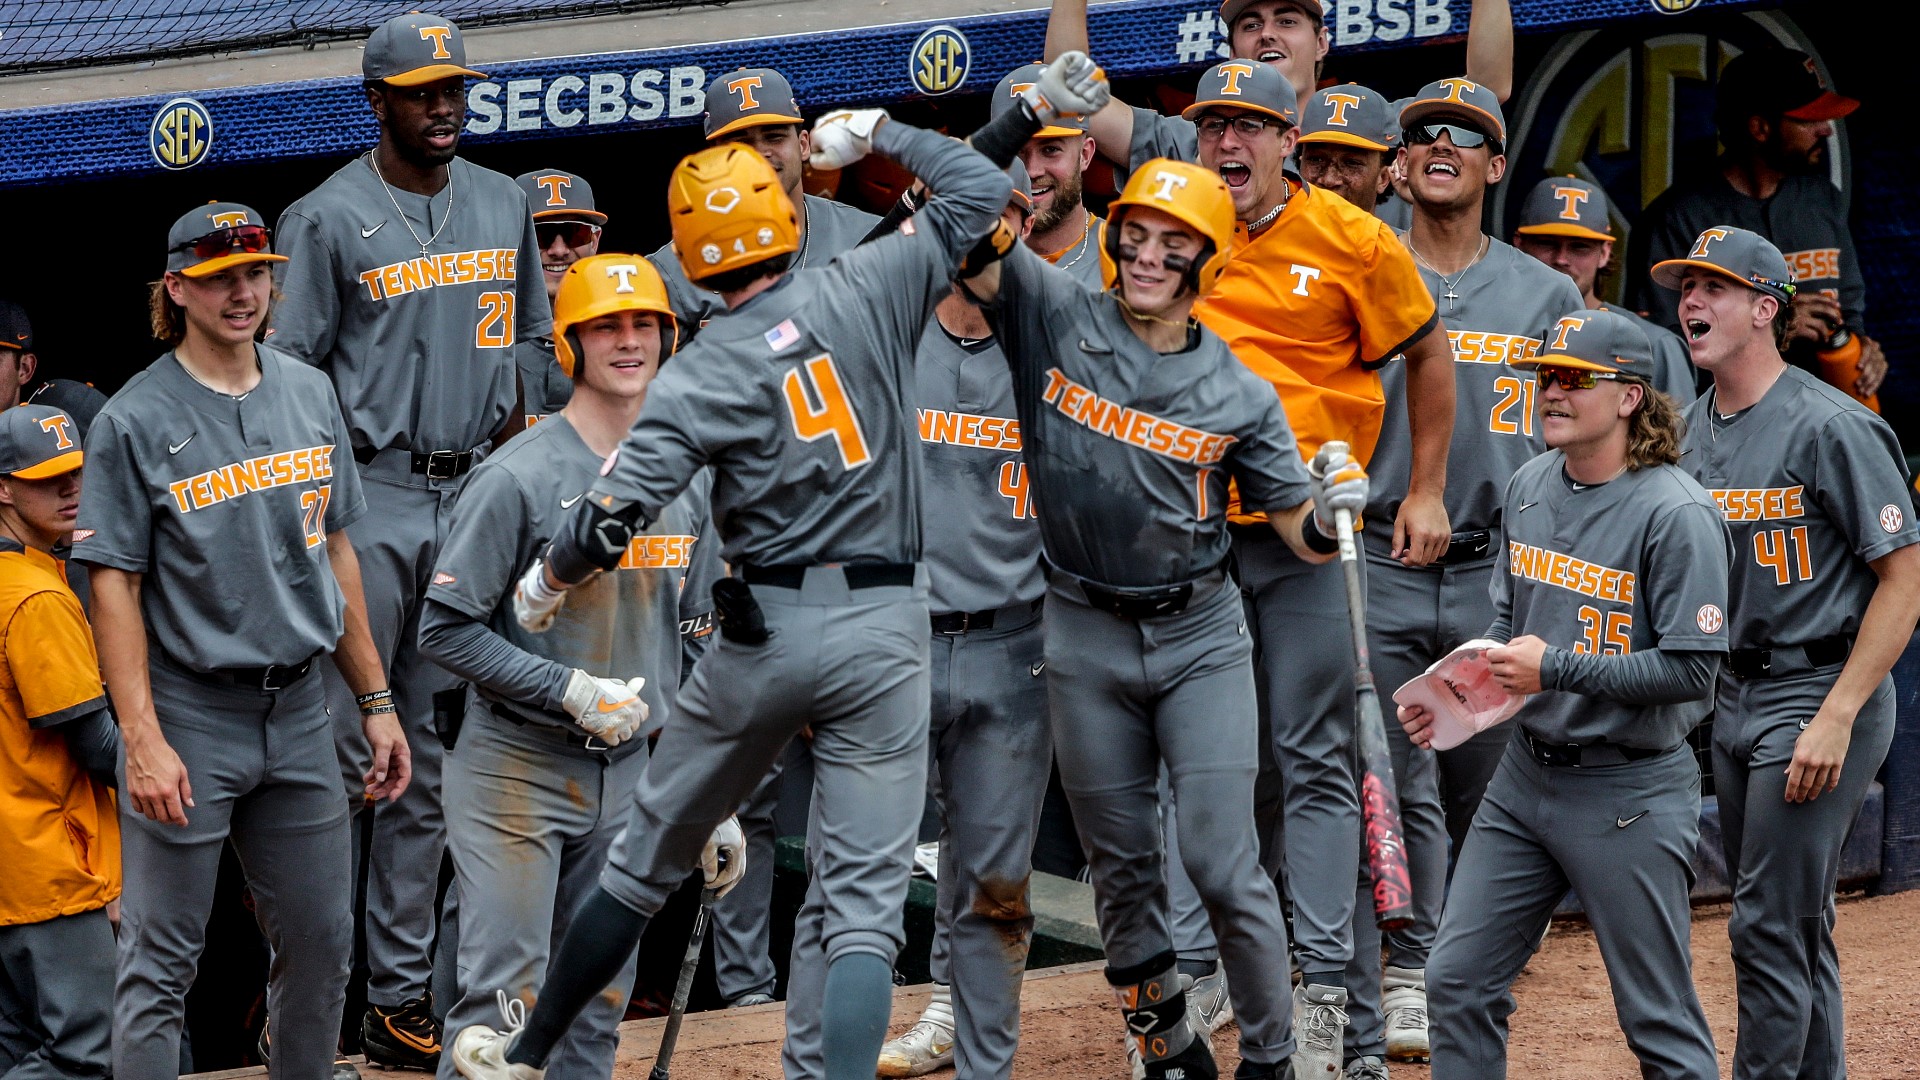 On Friday, June 10, Tennessee Baseball will play Notre Dame at 6 p.m. EST. The game will air on ESPN2.